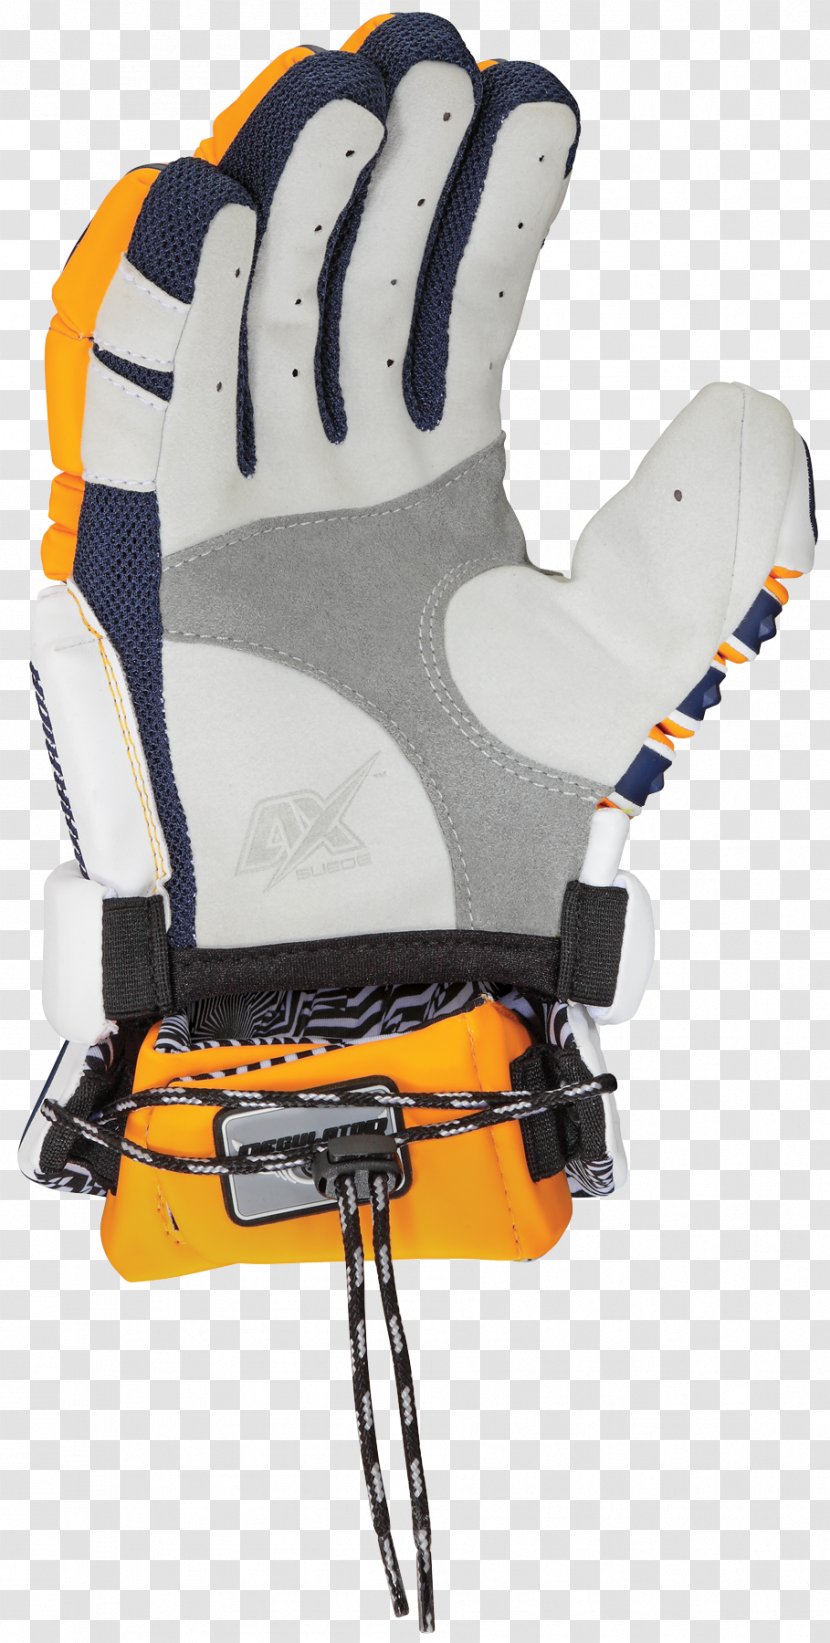 Lacrosse Glove - Baseball - Personal Protective Equipment Transparent PNG